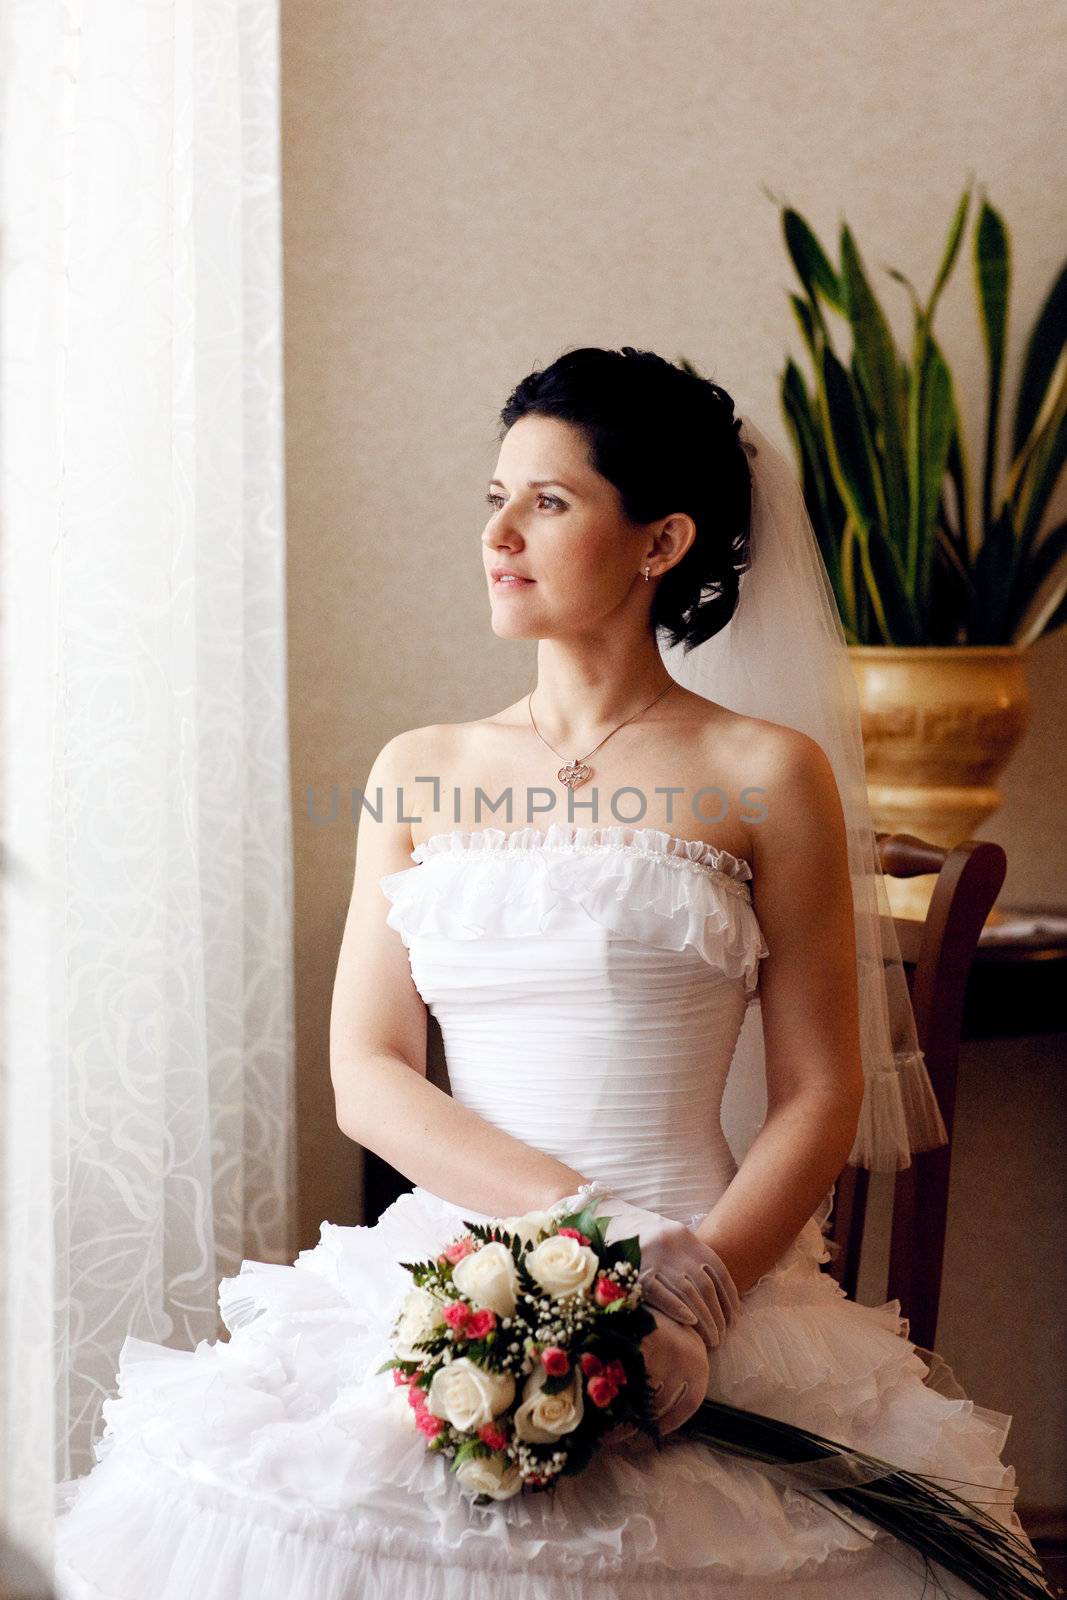 bride waiting for a groom near the window